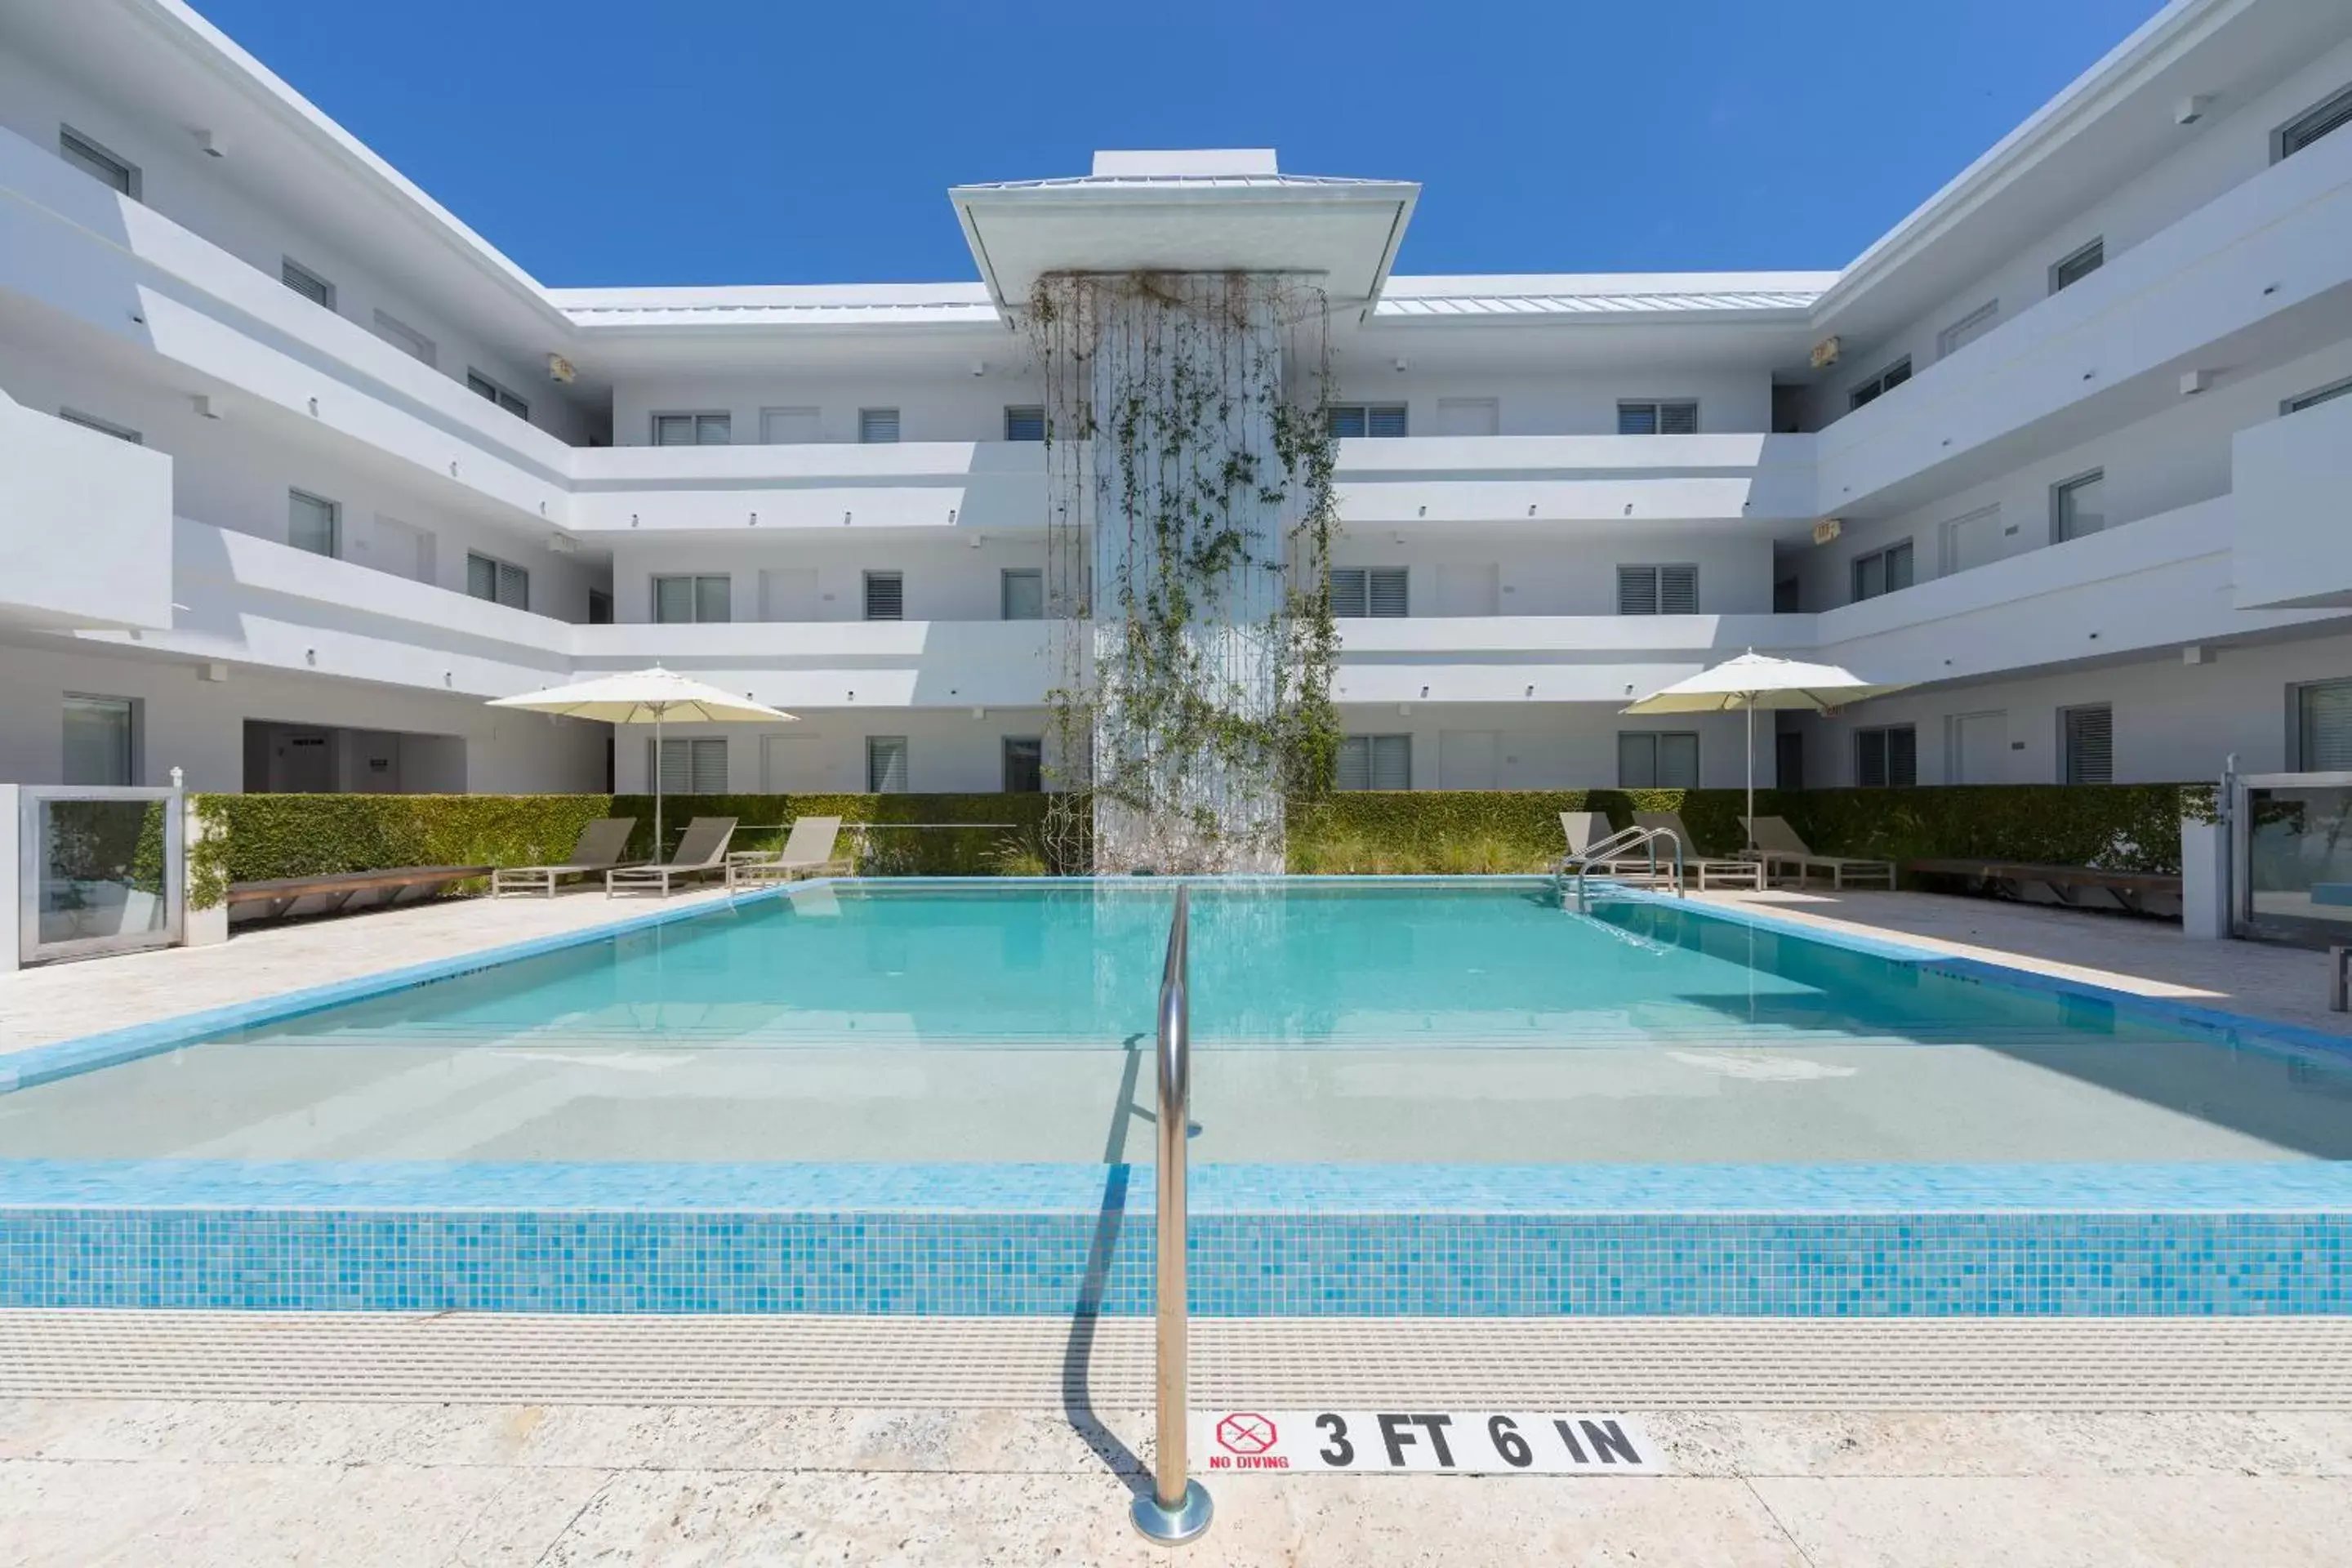 Swimming Pool in Beach Haus Key Biscayne Contemporary Apartments